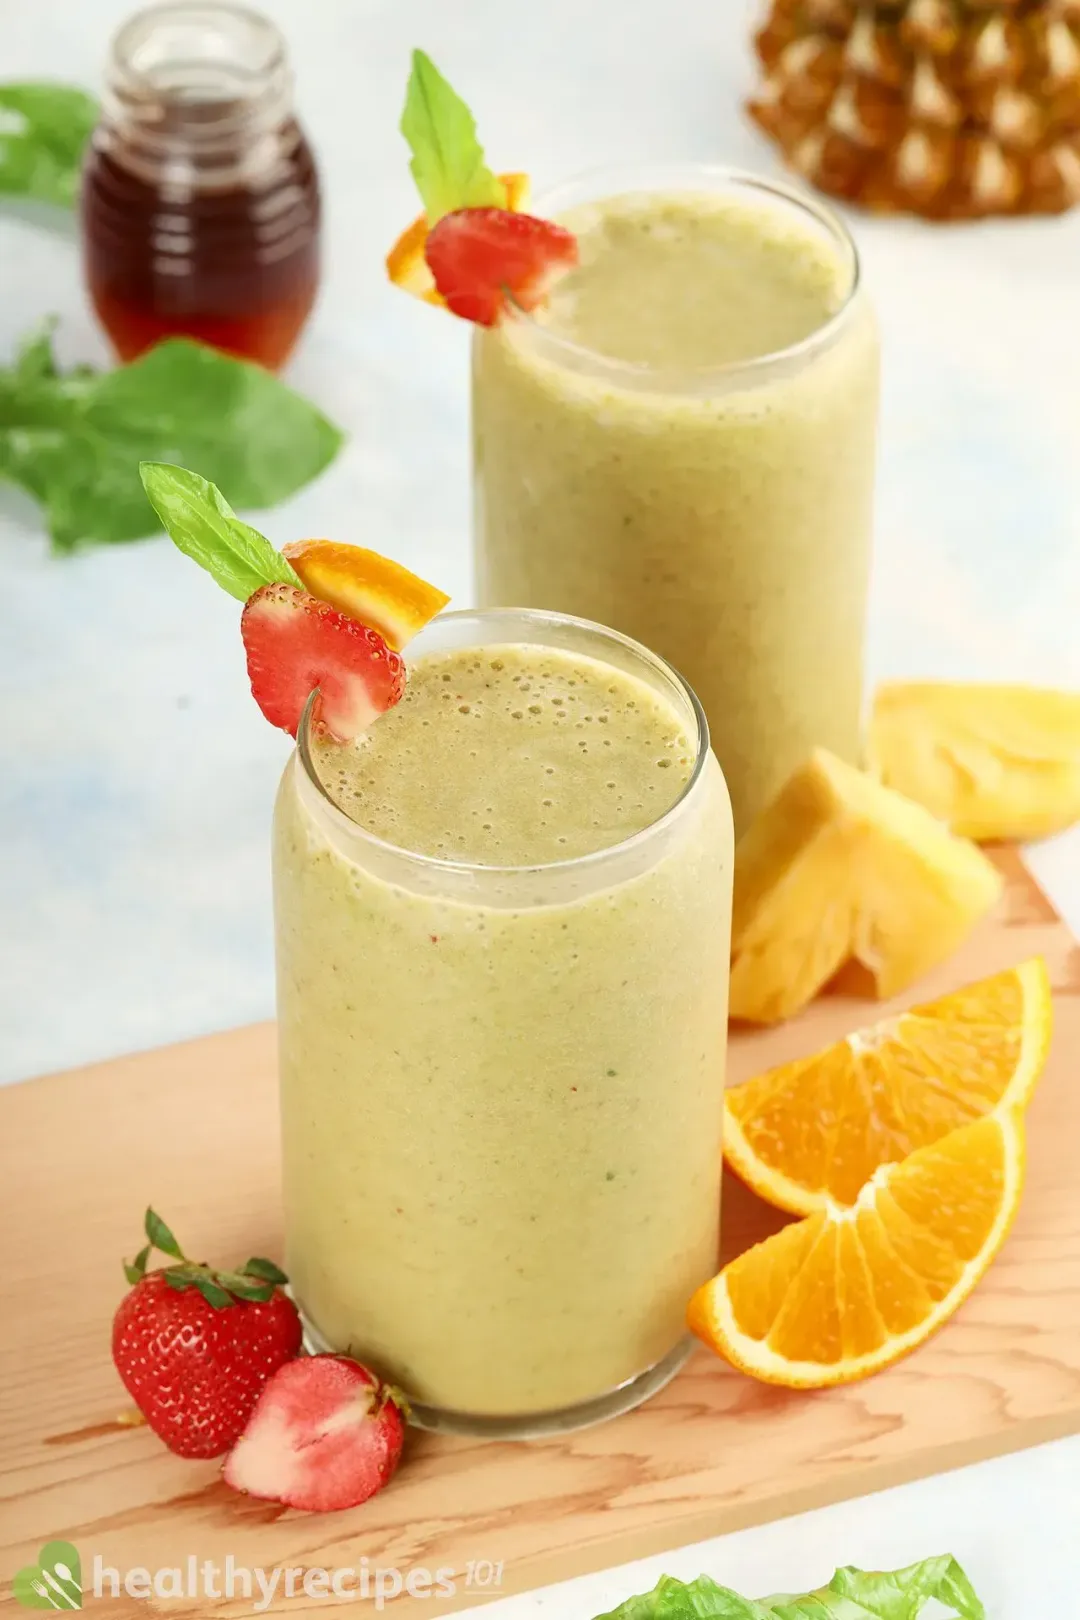 can i use frozen fruit for banana pineapple smoothie